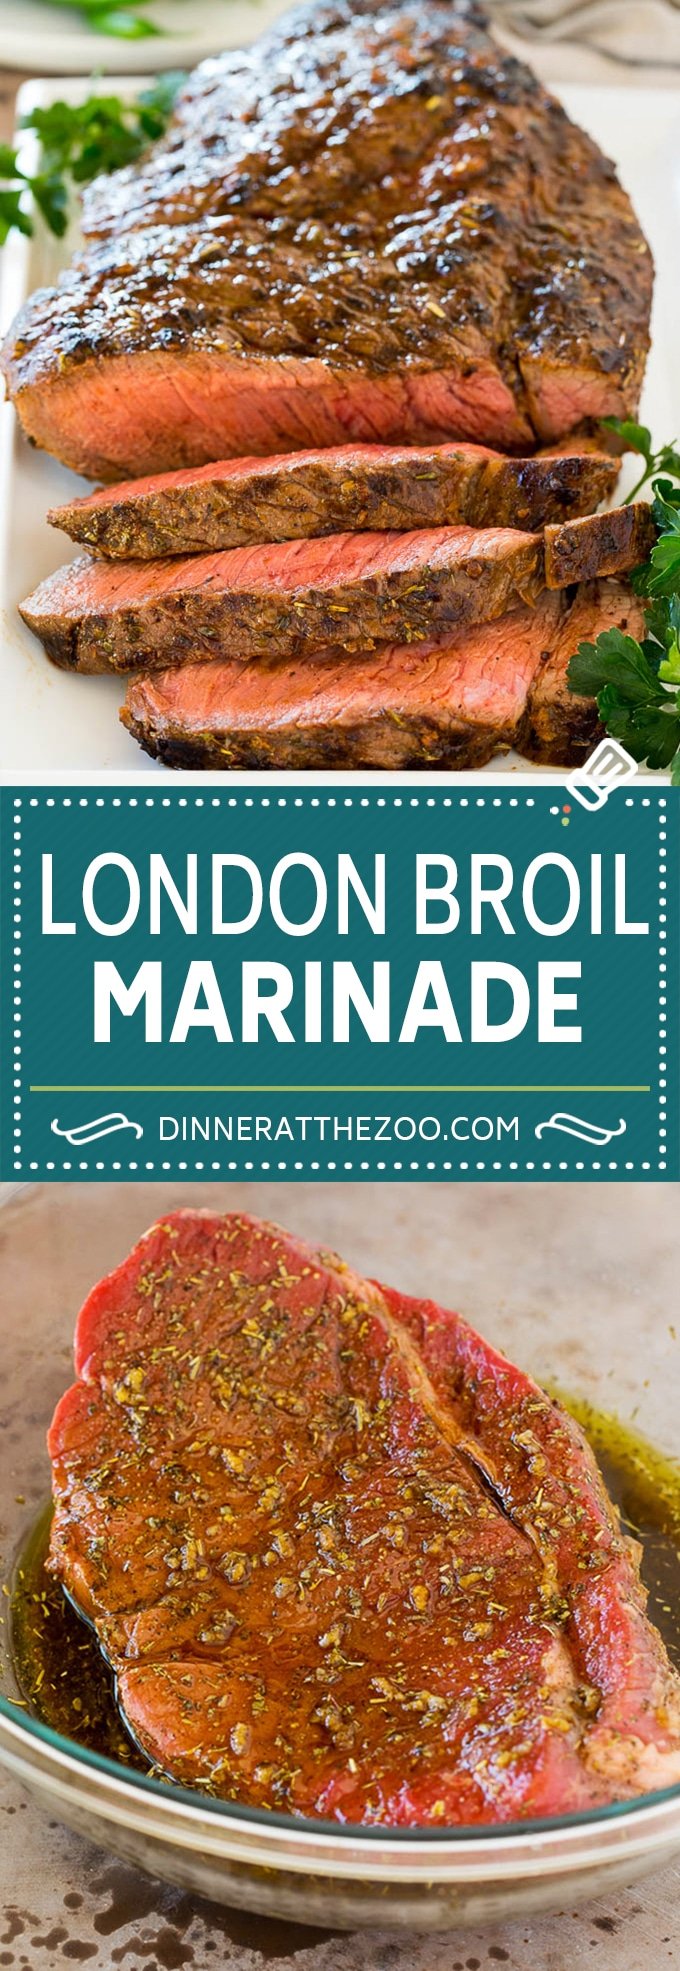 This London broil marinade is made with a savory blend of olive oil, lemon juice, soy sauce and plenty of herbs and spices.